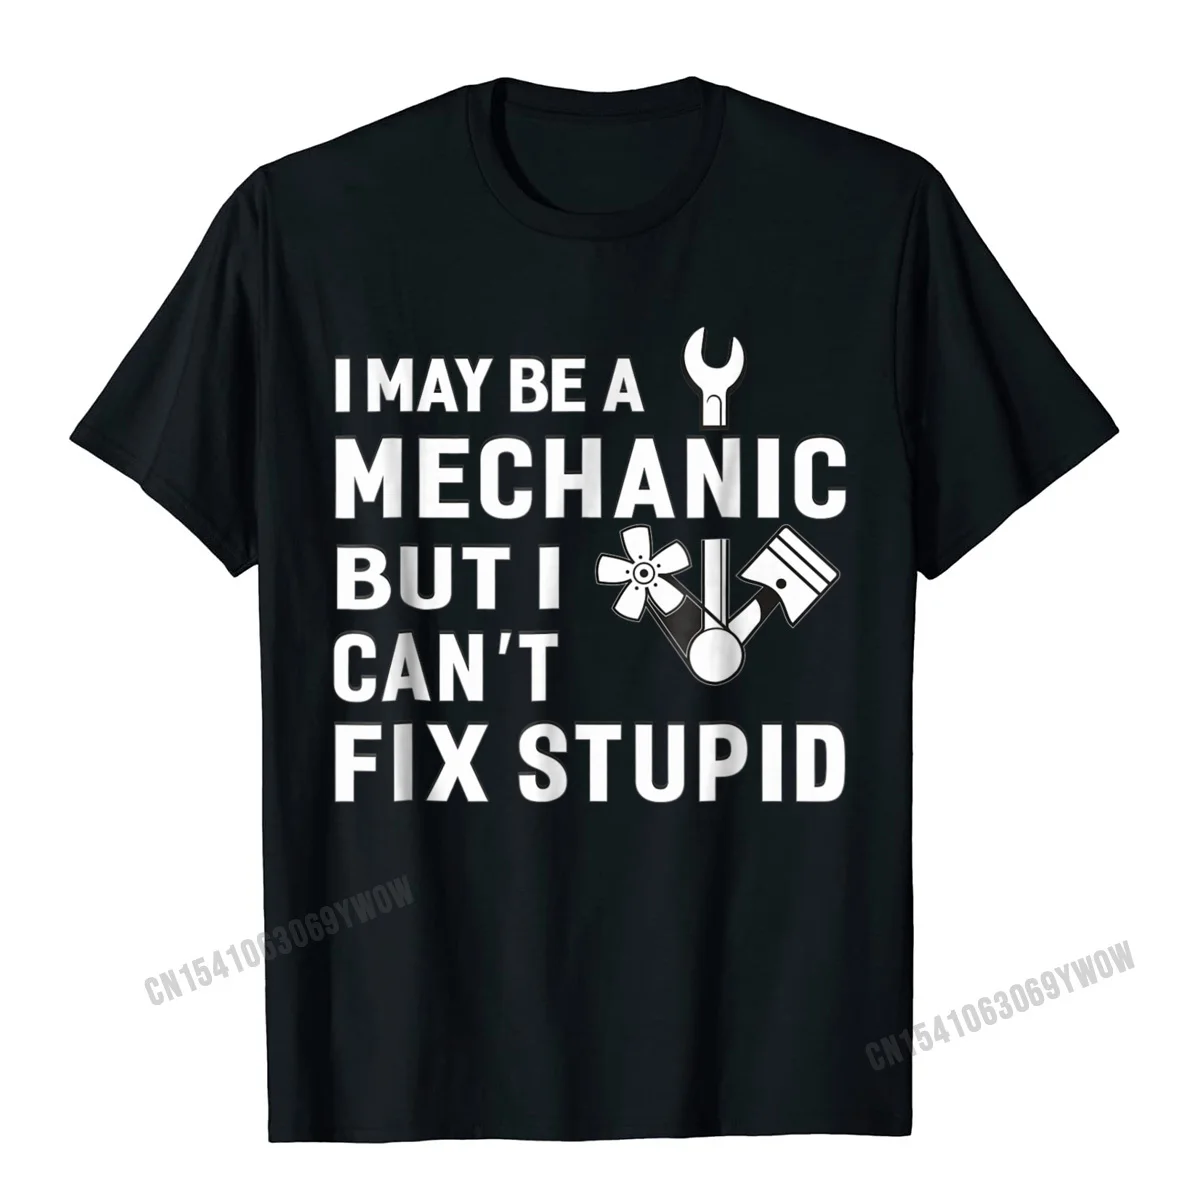 

I May Be A MECHANIC But I Cant Fix STUPID T Shirt Funny Tee Camisas Men Cotton Men Tops Shirt Personalized Fashion Top T-Shirts